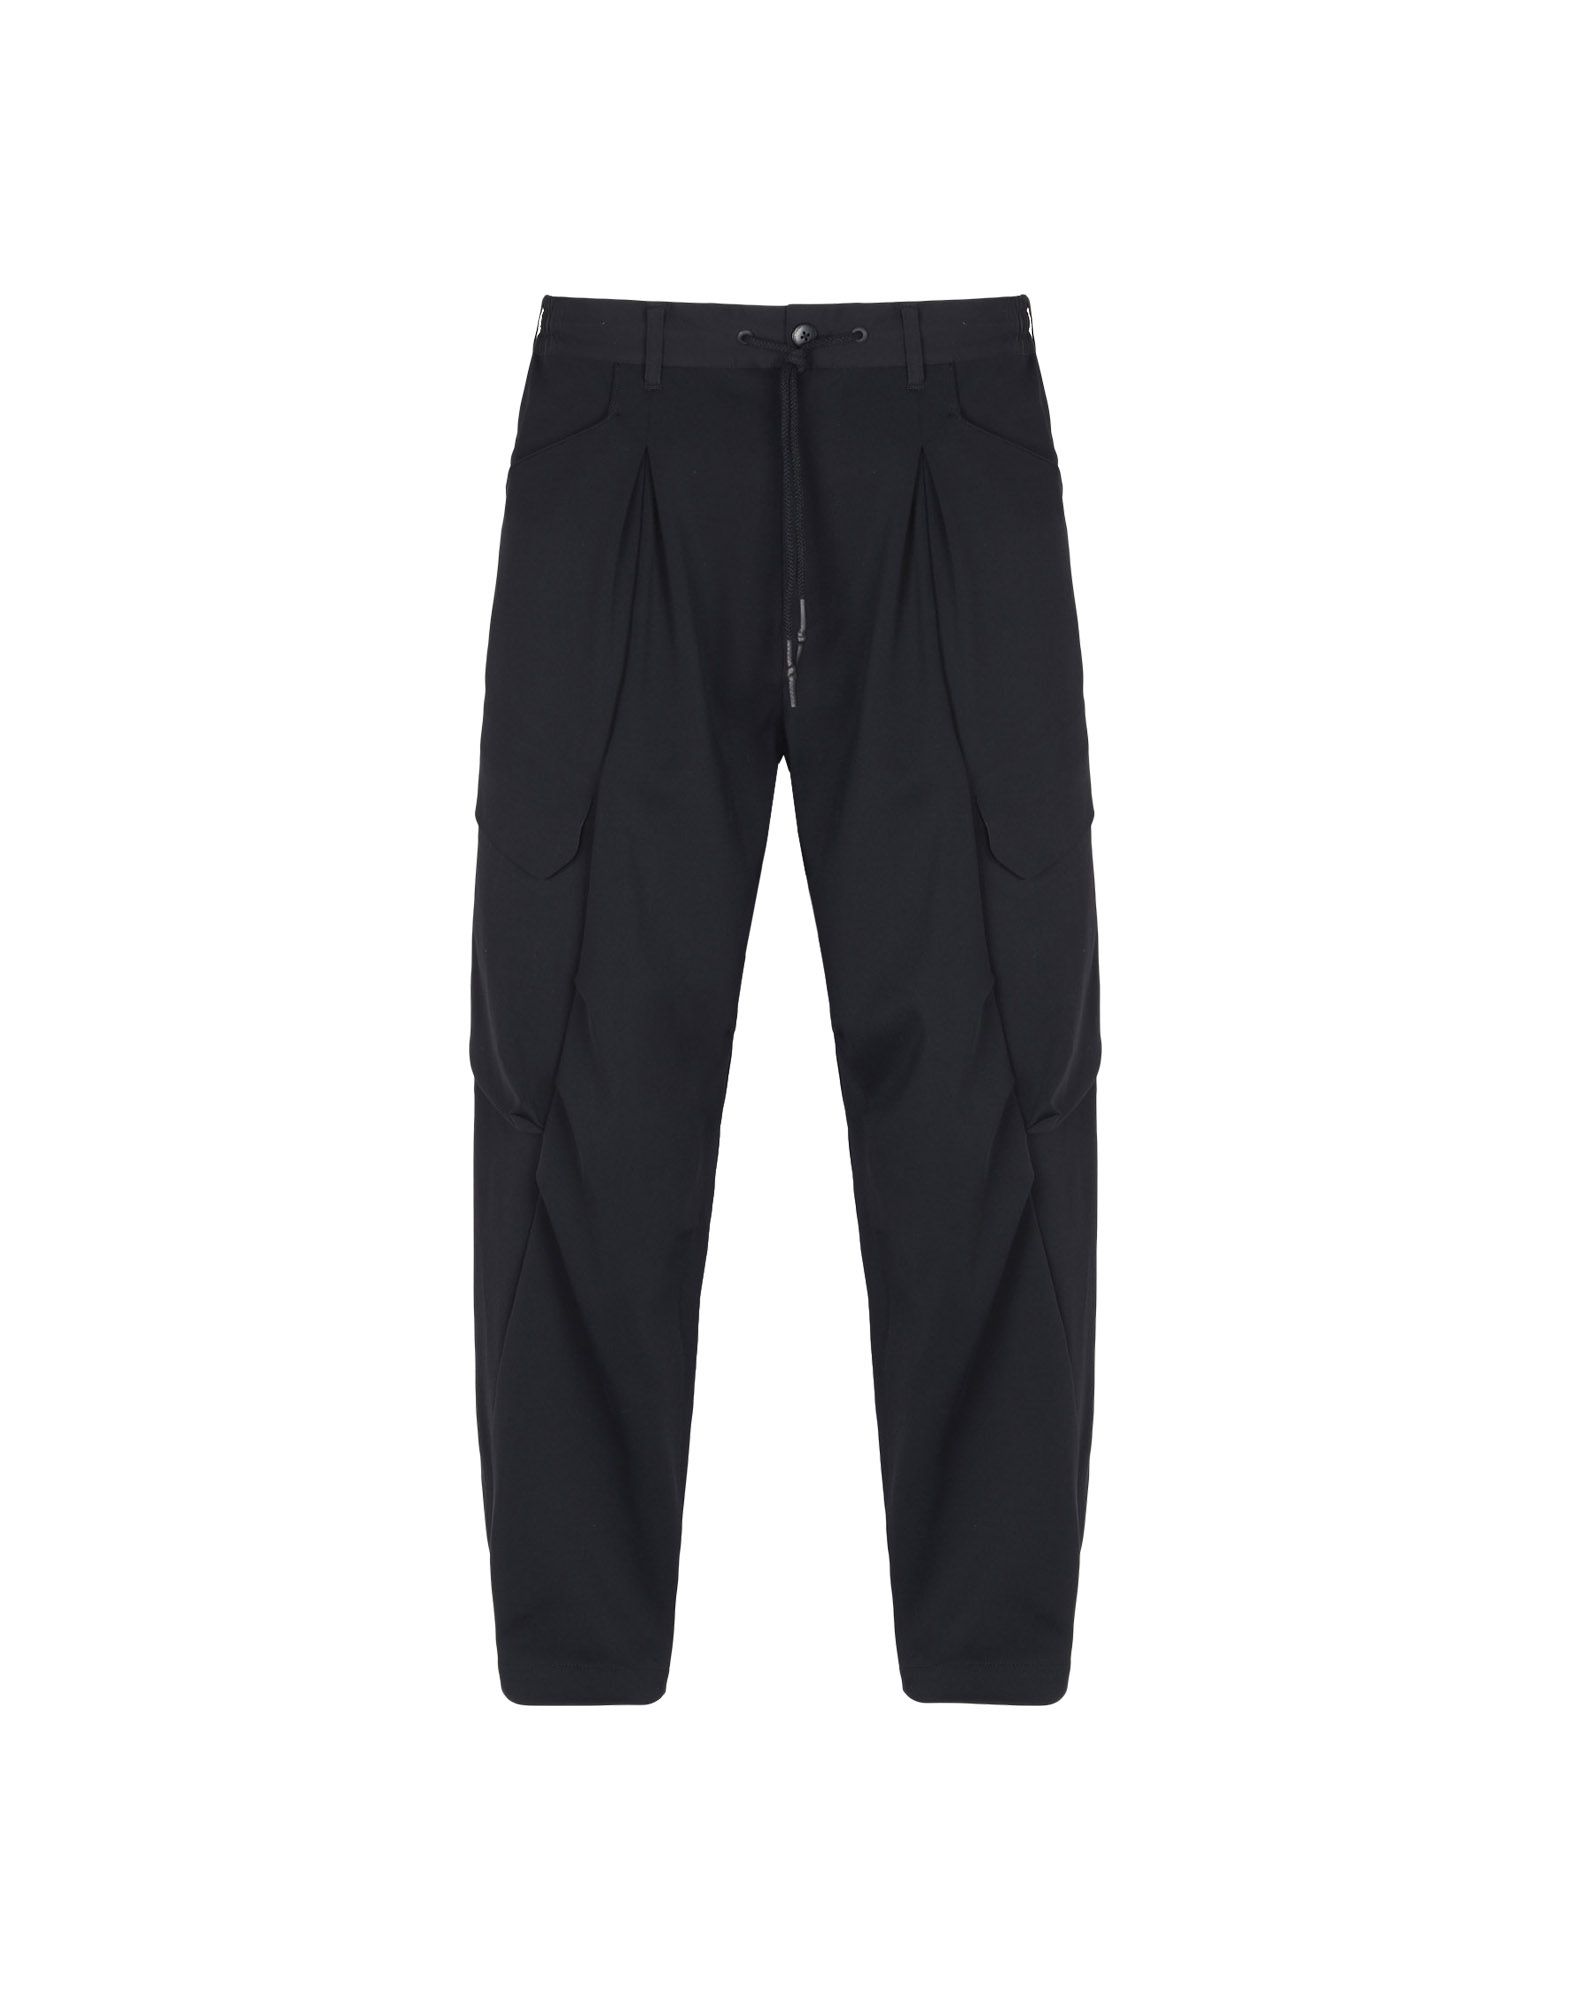 Y 3 LUX FUTURE SPORT PANT for Men | Adidas Y-3 Official Store